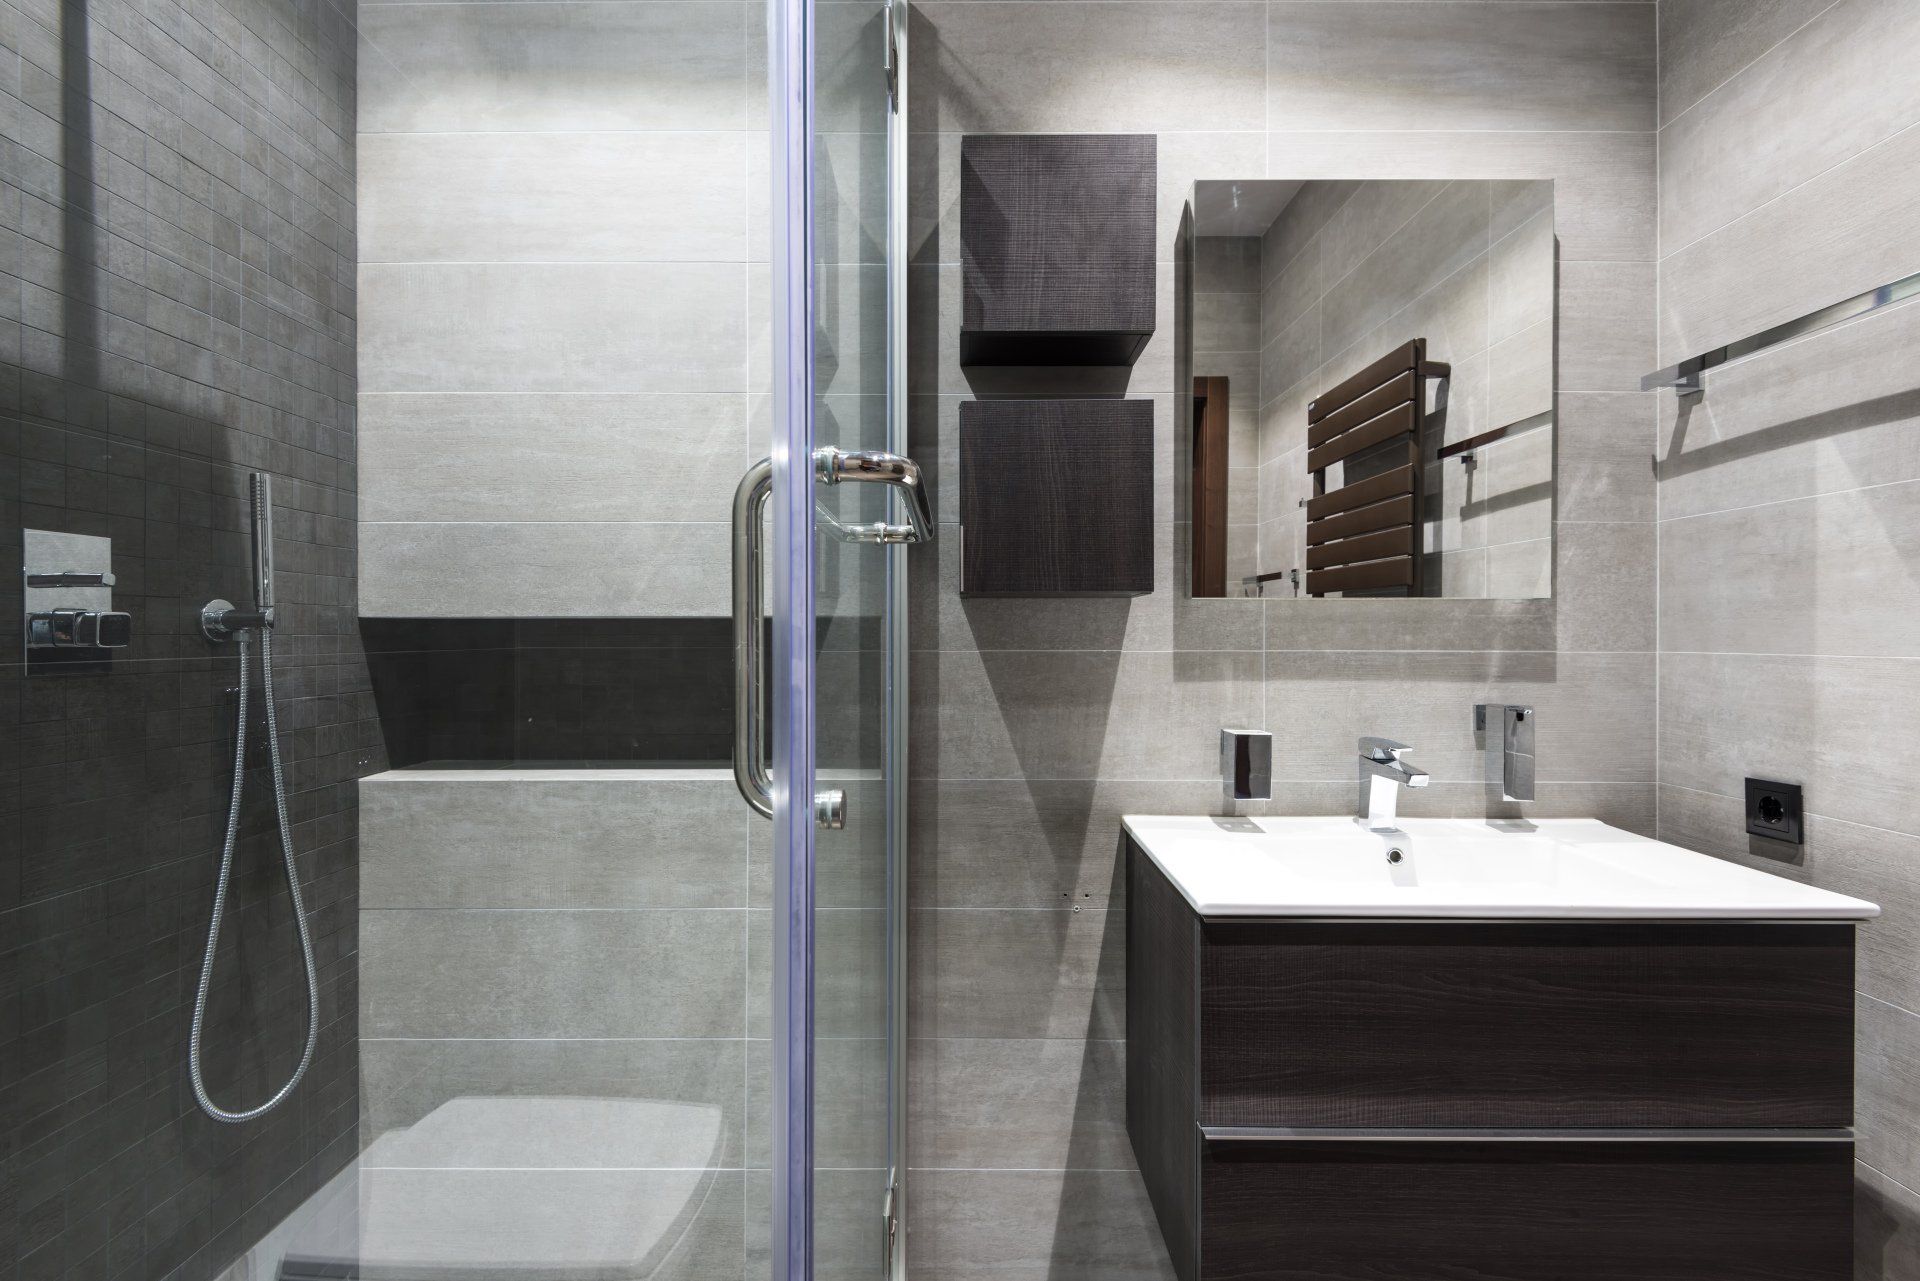 Tanguay Homes is here to help with 7 tips to help with your bathroom remodel